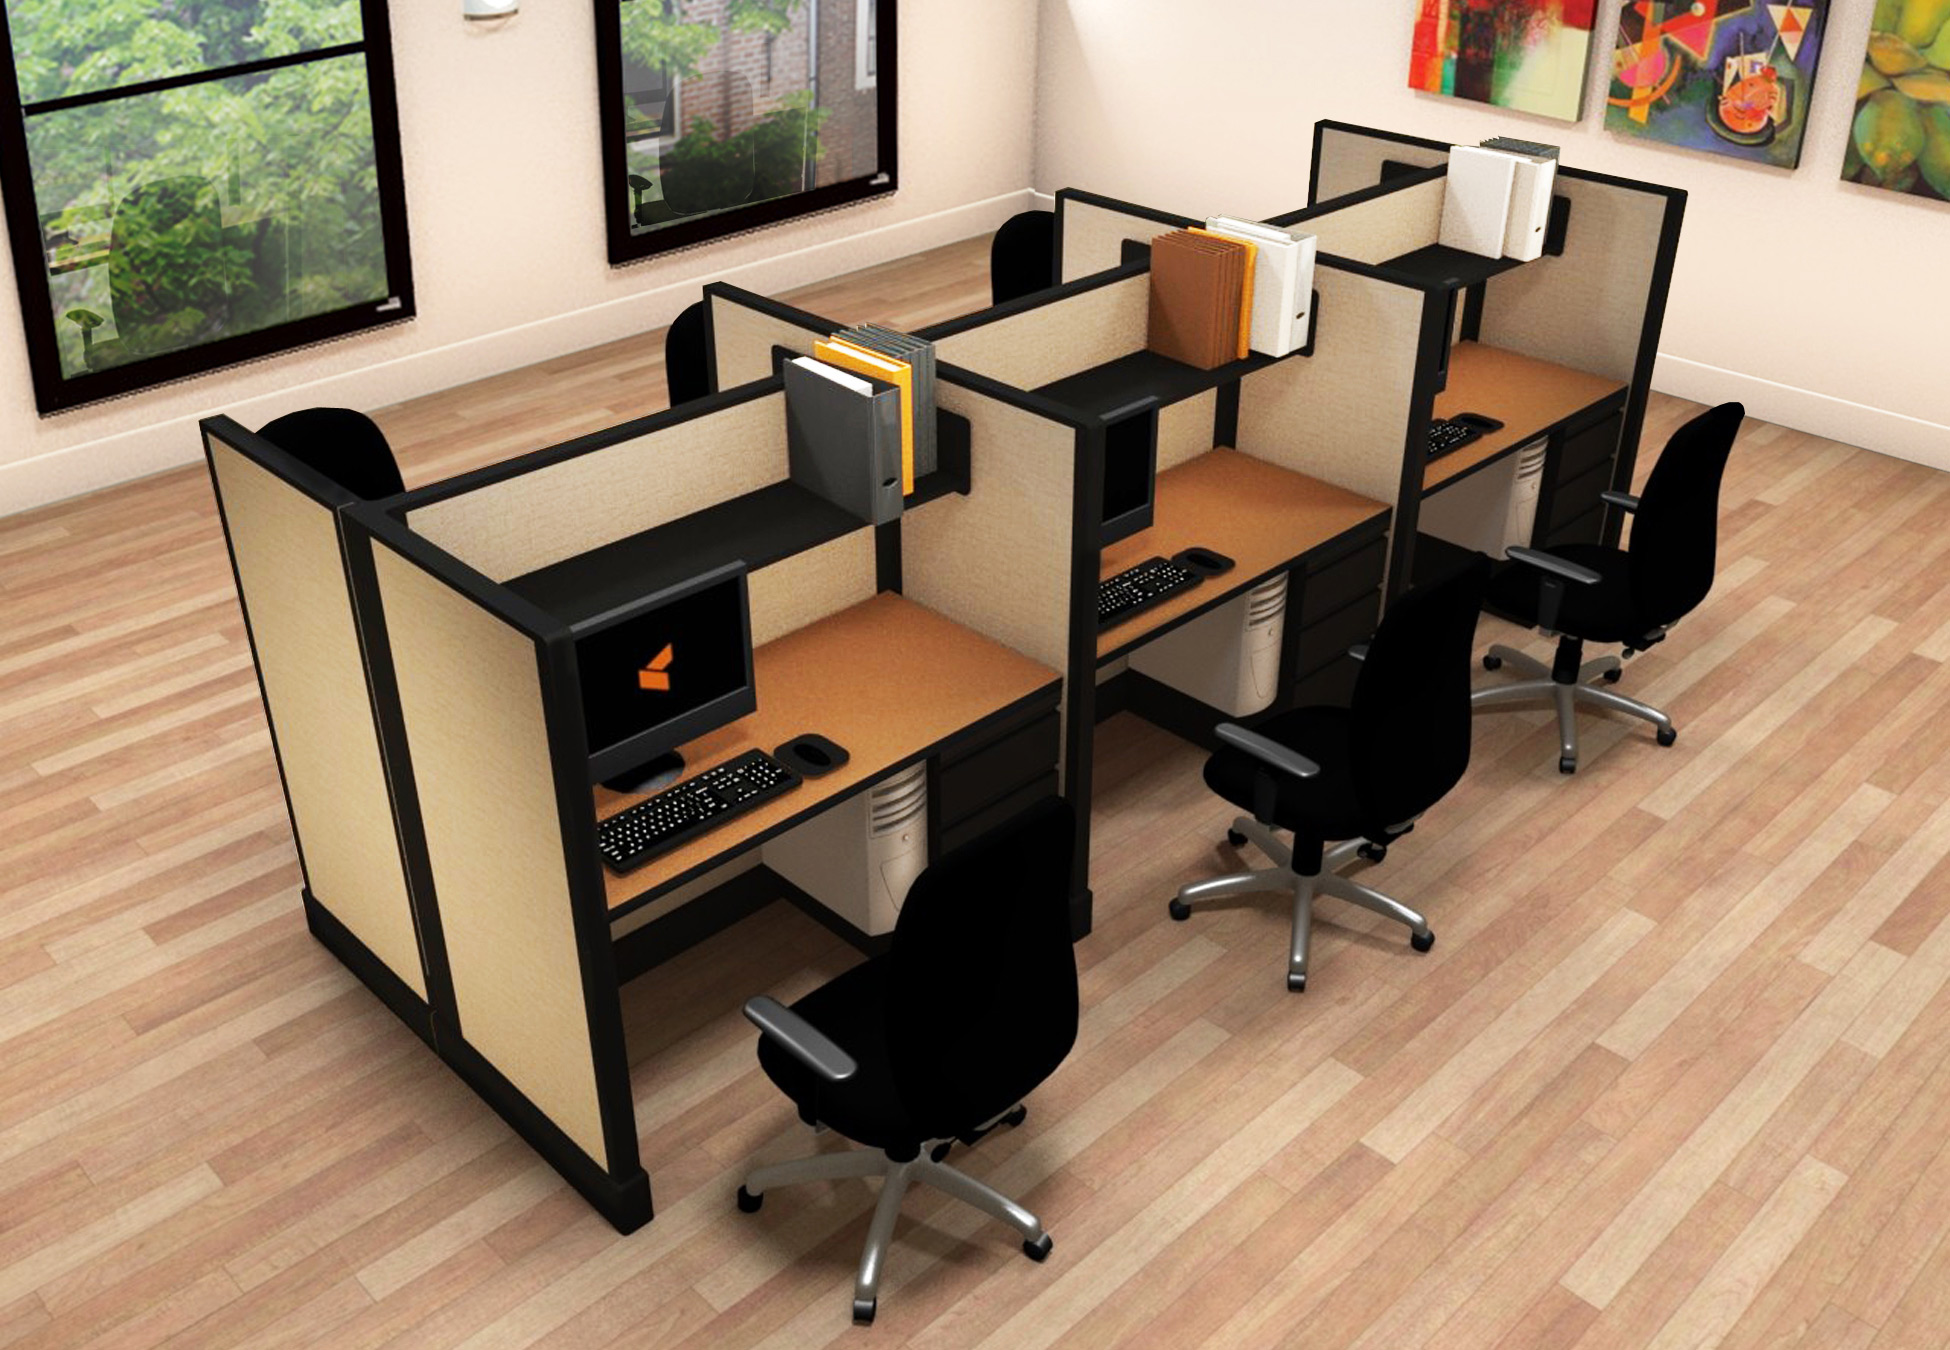 2x4 Small Office Cubicles - 6 Pack Cluster